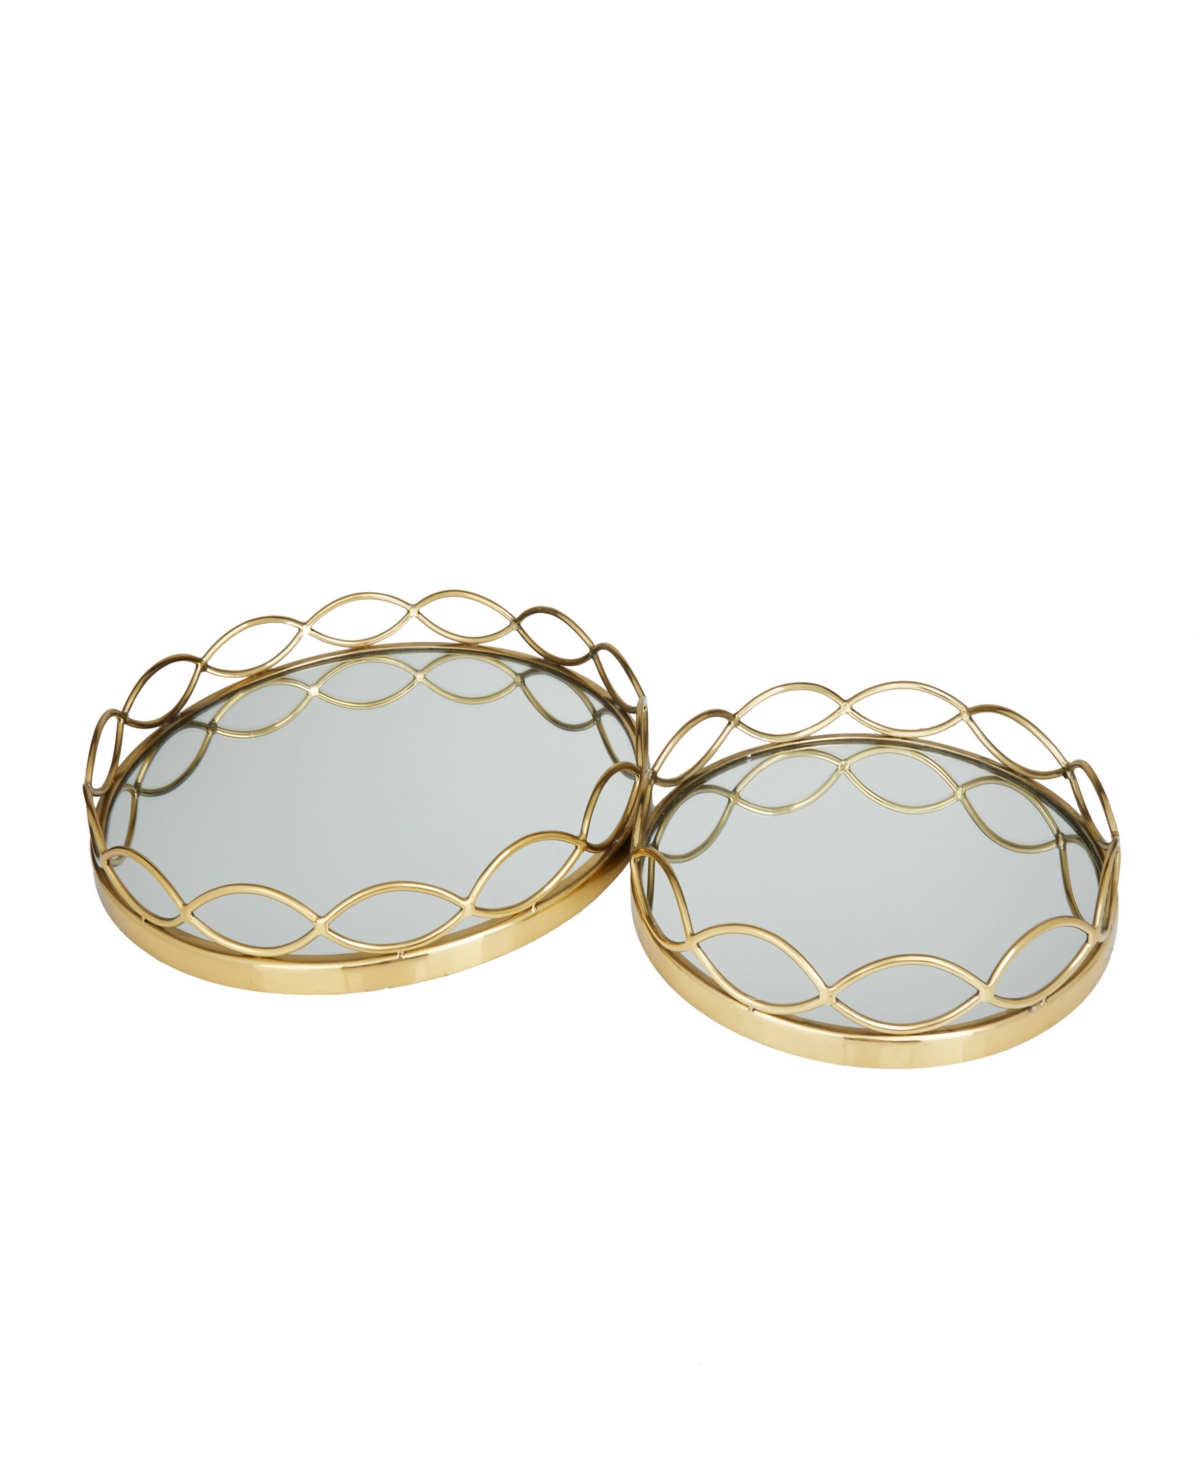 Rosemary Lane Stainless Steel Mirrored Tray, Set Of 2, 18", 14" W In Gold